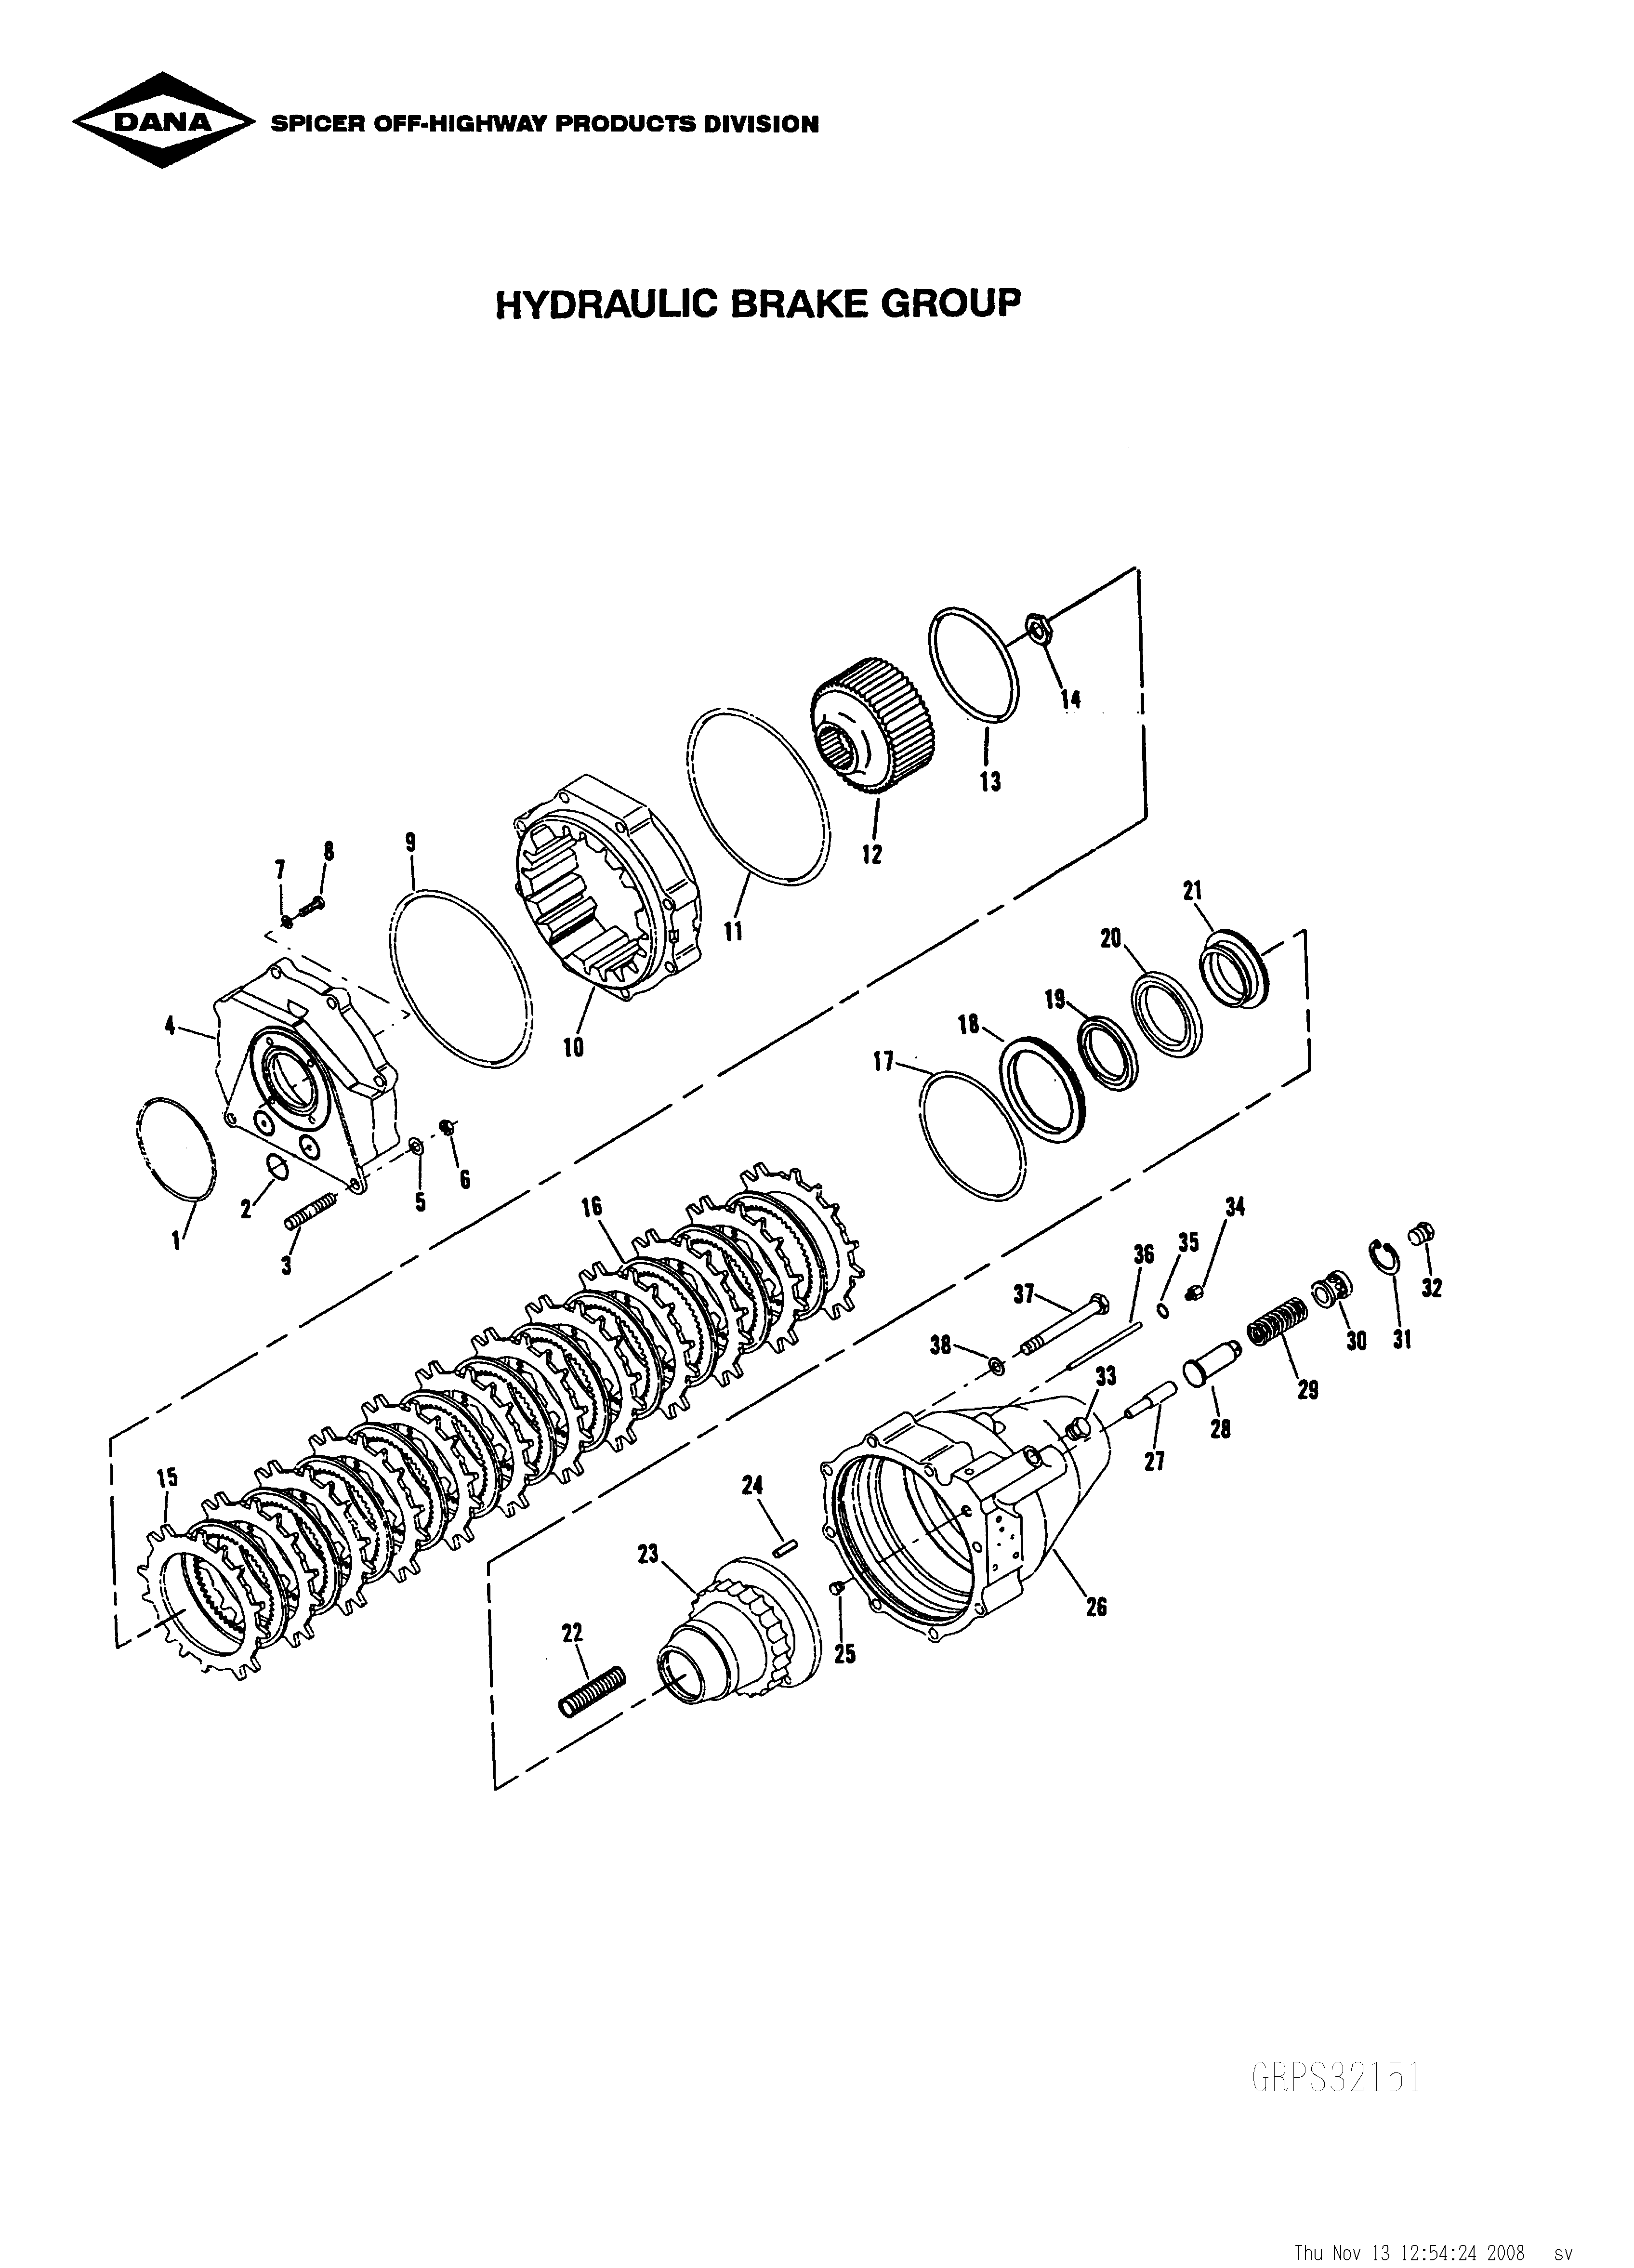 drawing for MINING TECHNOLOGIES 001801-072 - O RING (figure 5)